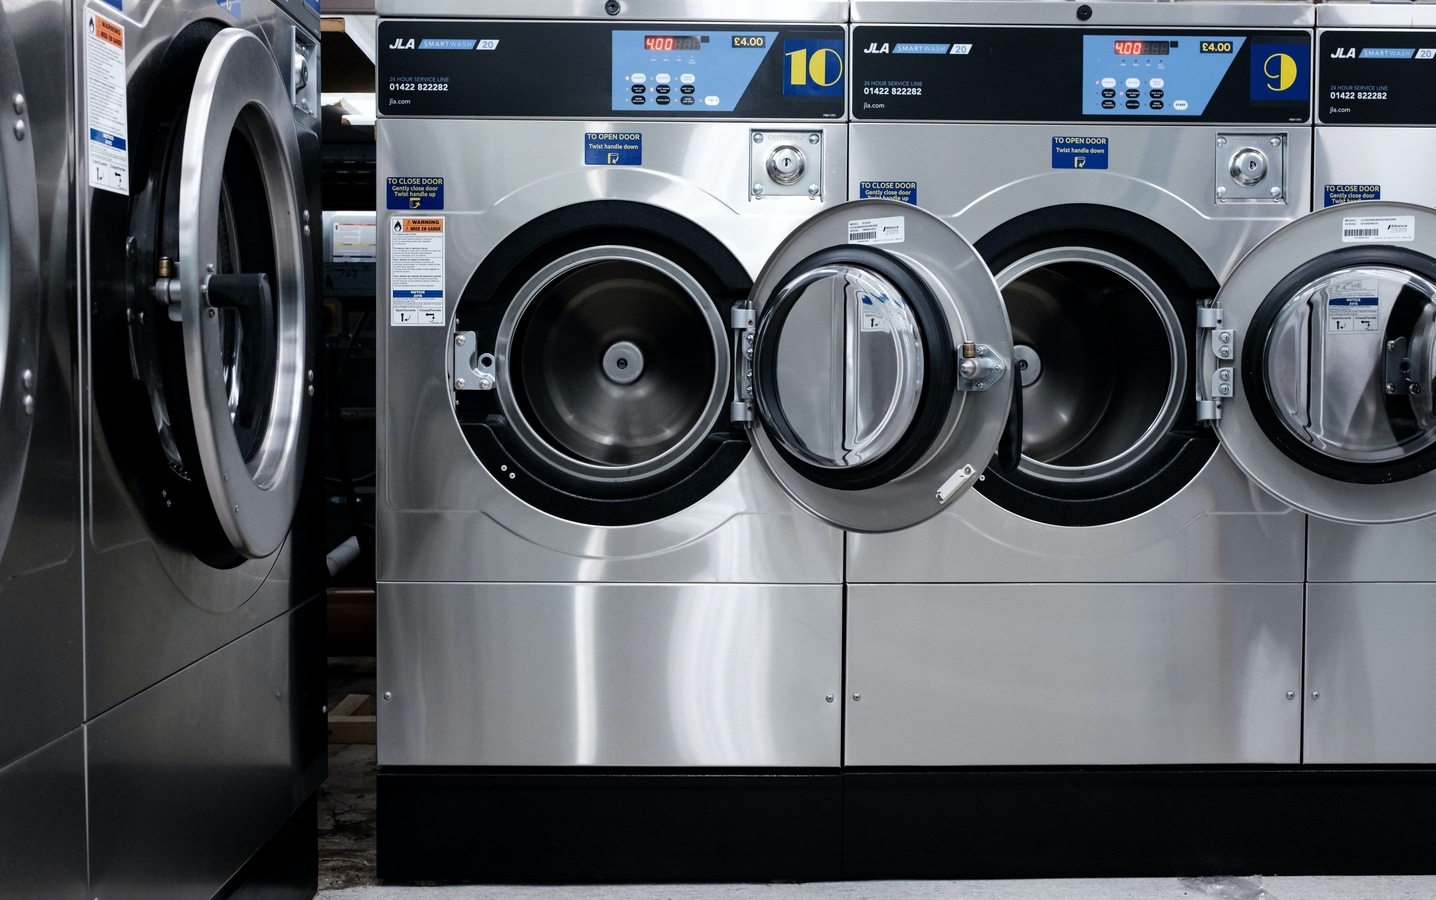 10 best Samsung 6.5 kg top load washing machines and competing brands  compared - Hindustan Times